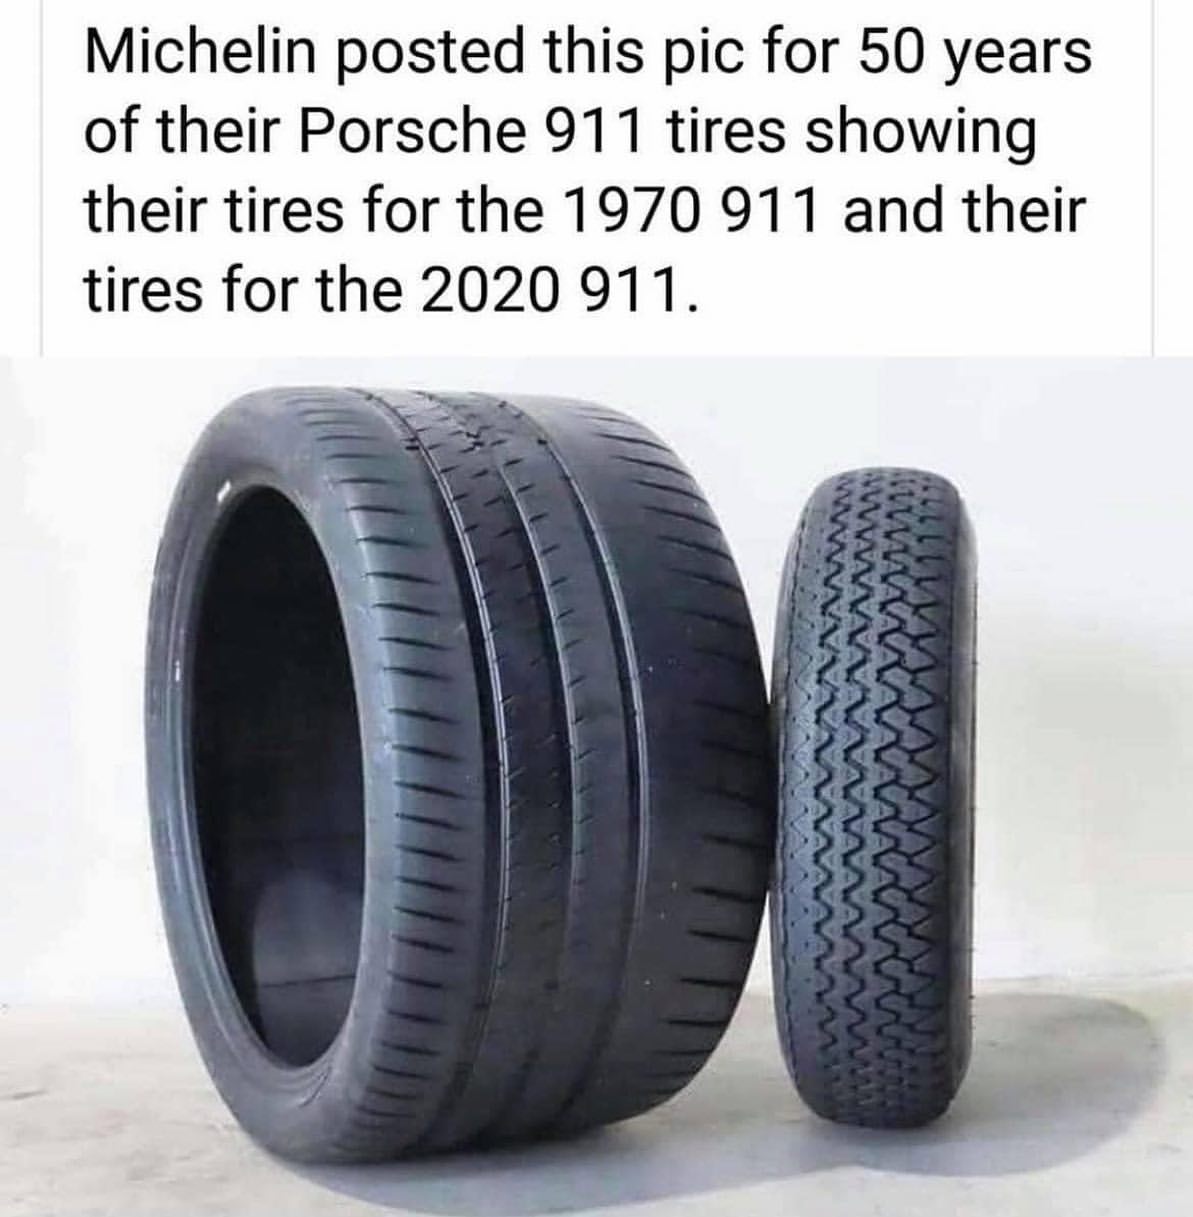 Michelin posted this pic for 50 years of their Porsche 911 tires showing their tires for the 1970 911 and their tires for the 2020 911.